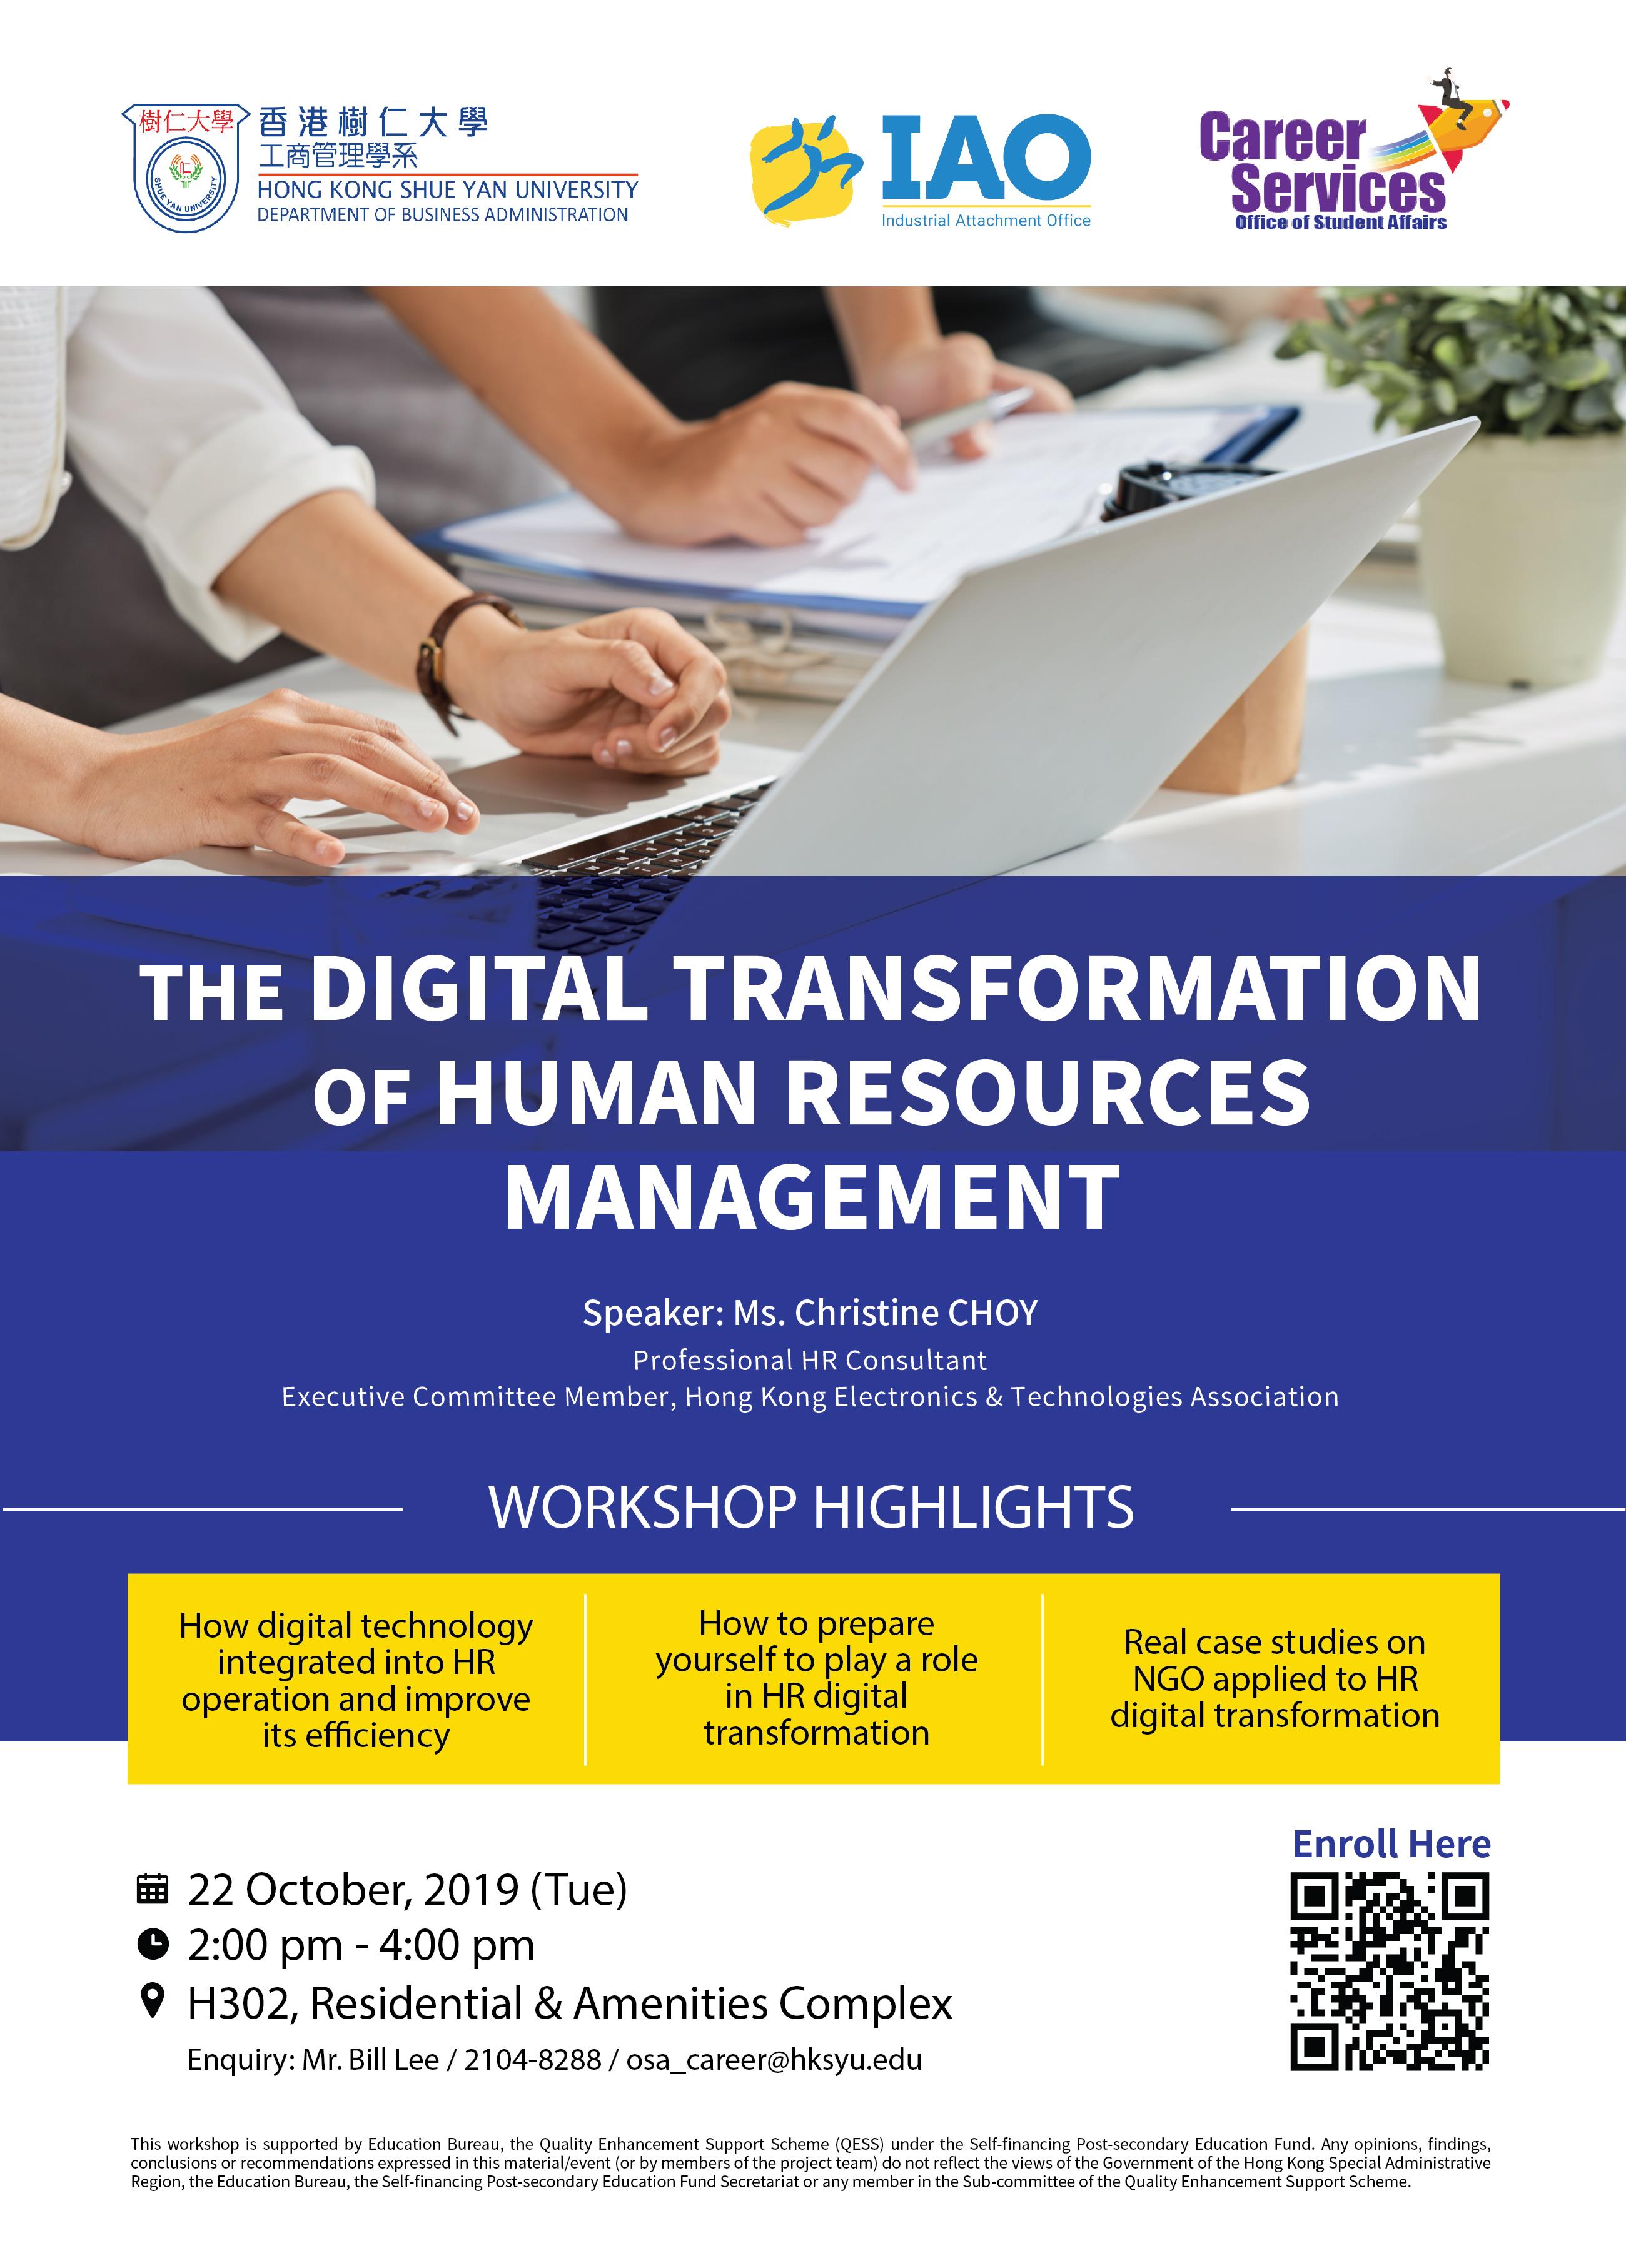 The Digital Transformation of Human Resources Management